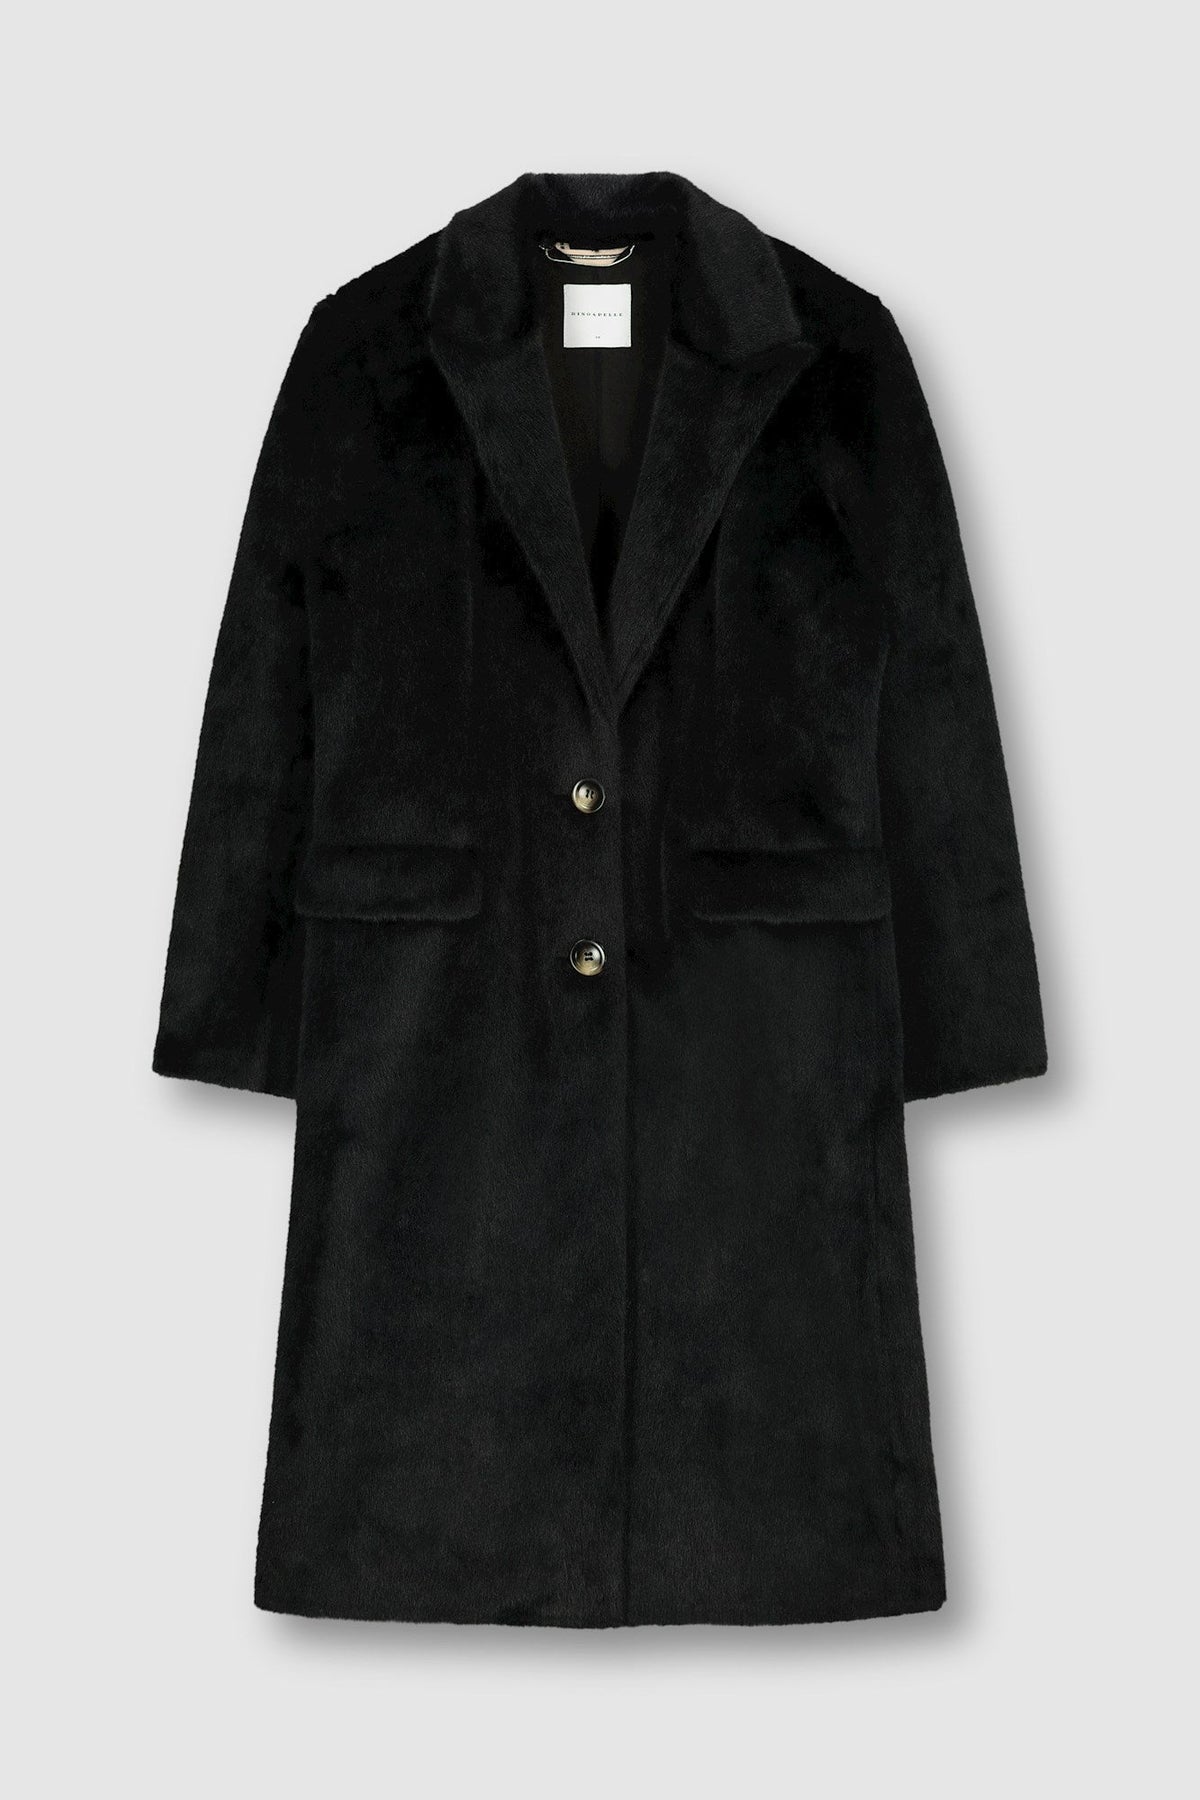 Midi length faux fur single breasted classic collar winter coat with two front pockets black